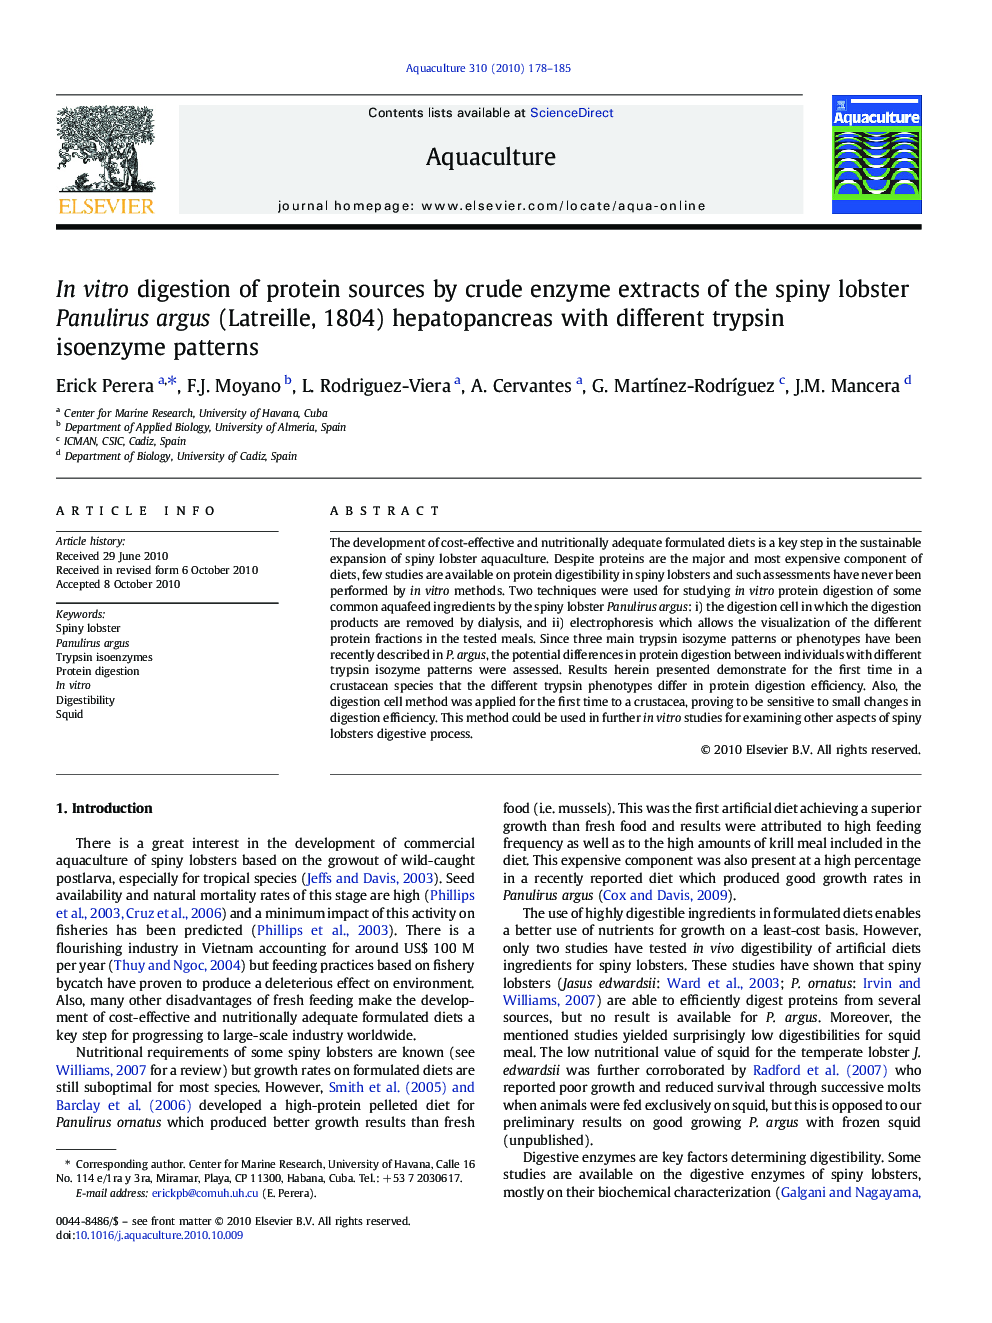 In vitro digestion of protein sources by crude enzyme extracts of the spiny lobster Panulirus argus (Latreille, 1804) hepatopancreas with different trypsin isoenzyme patterns